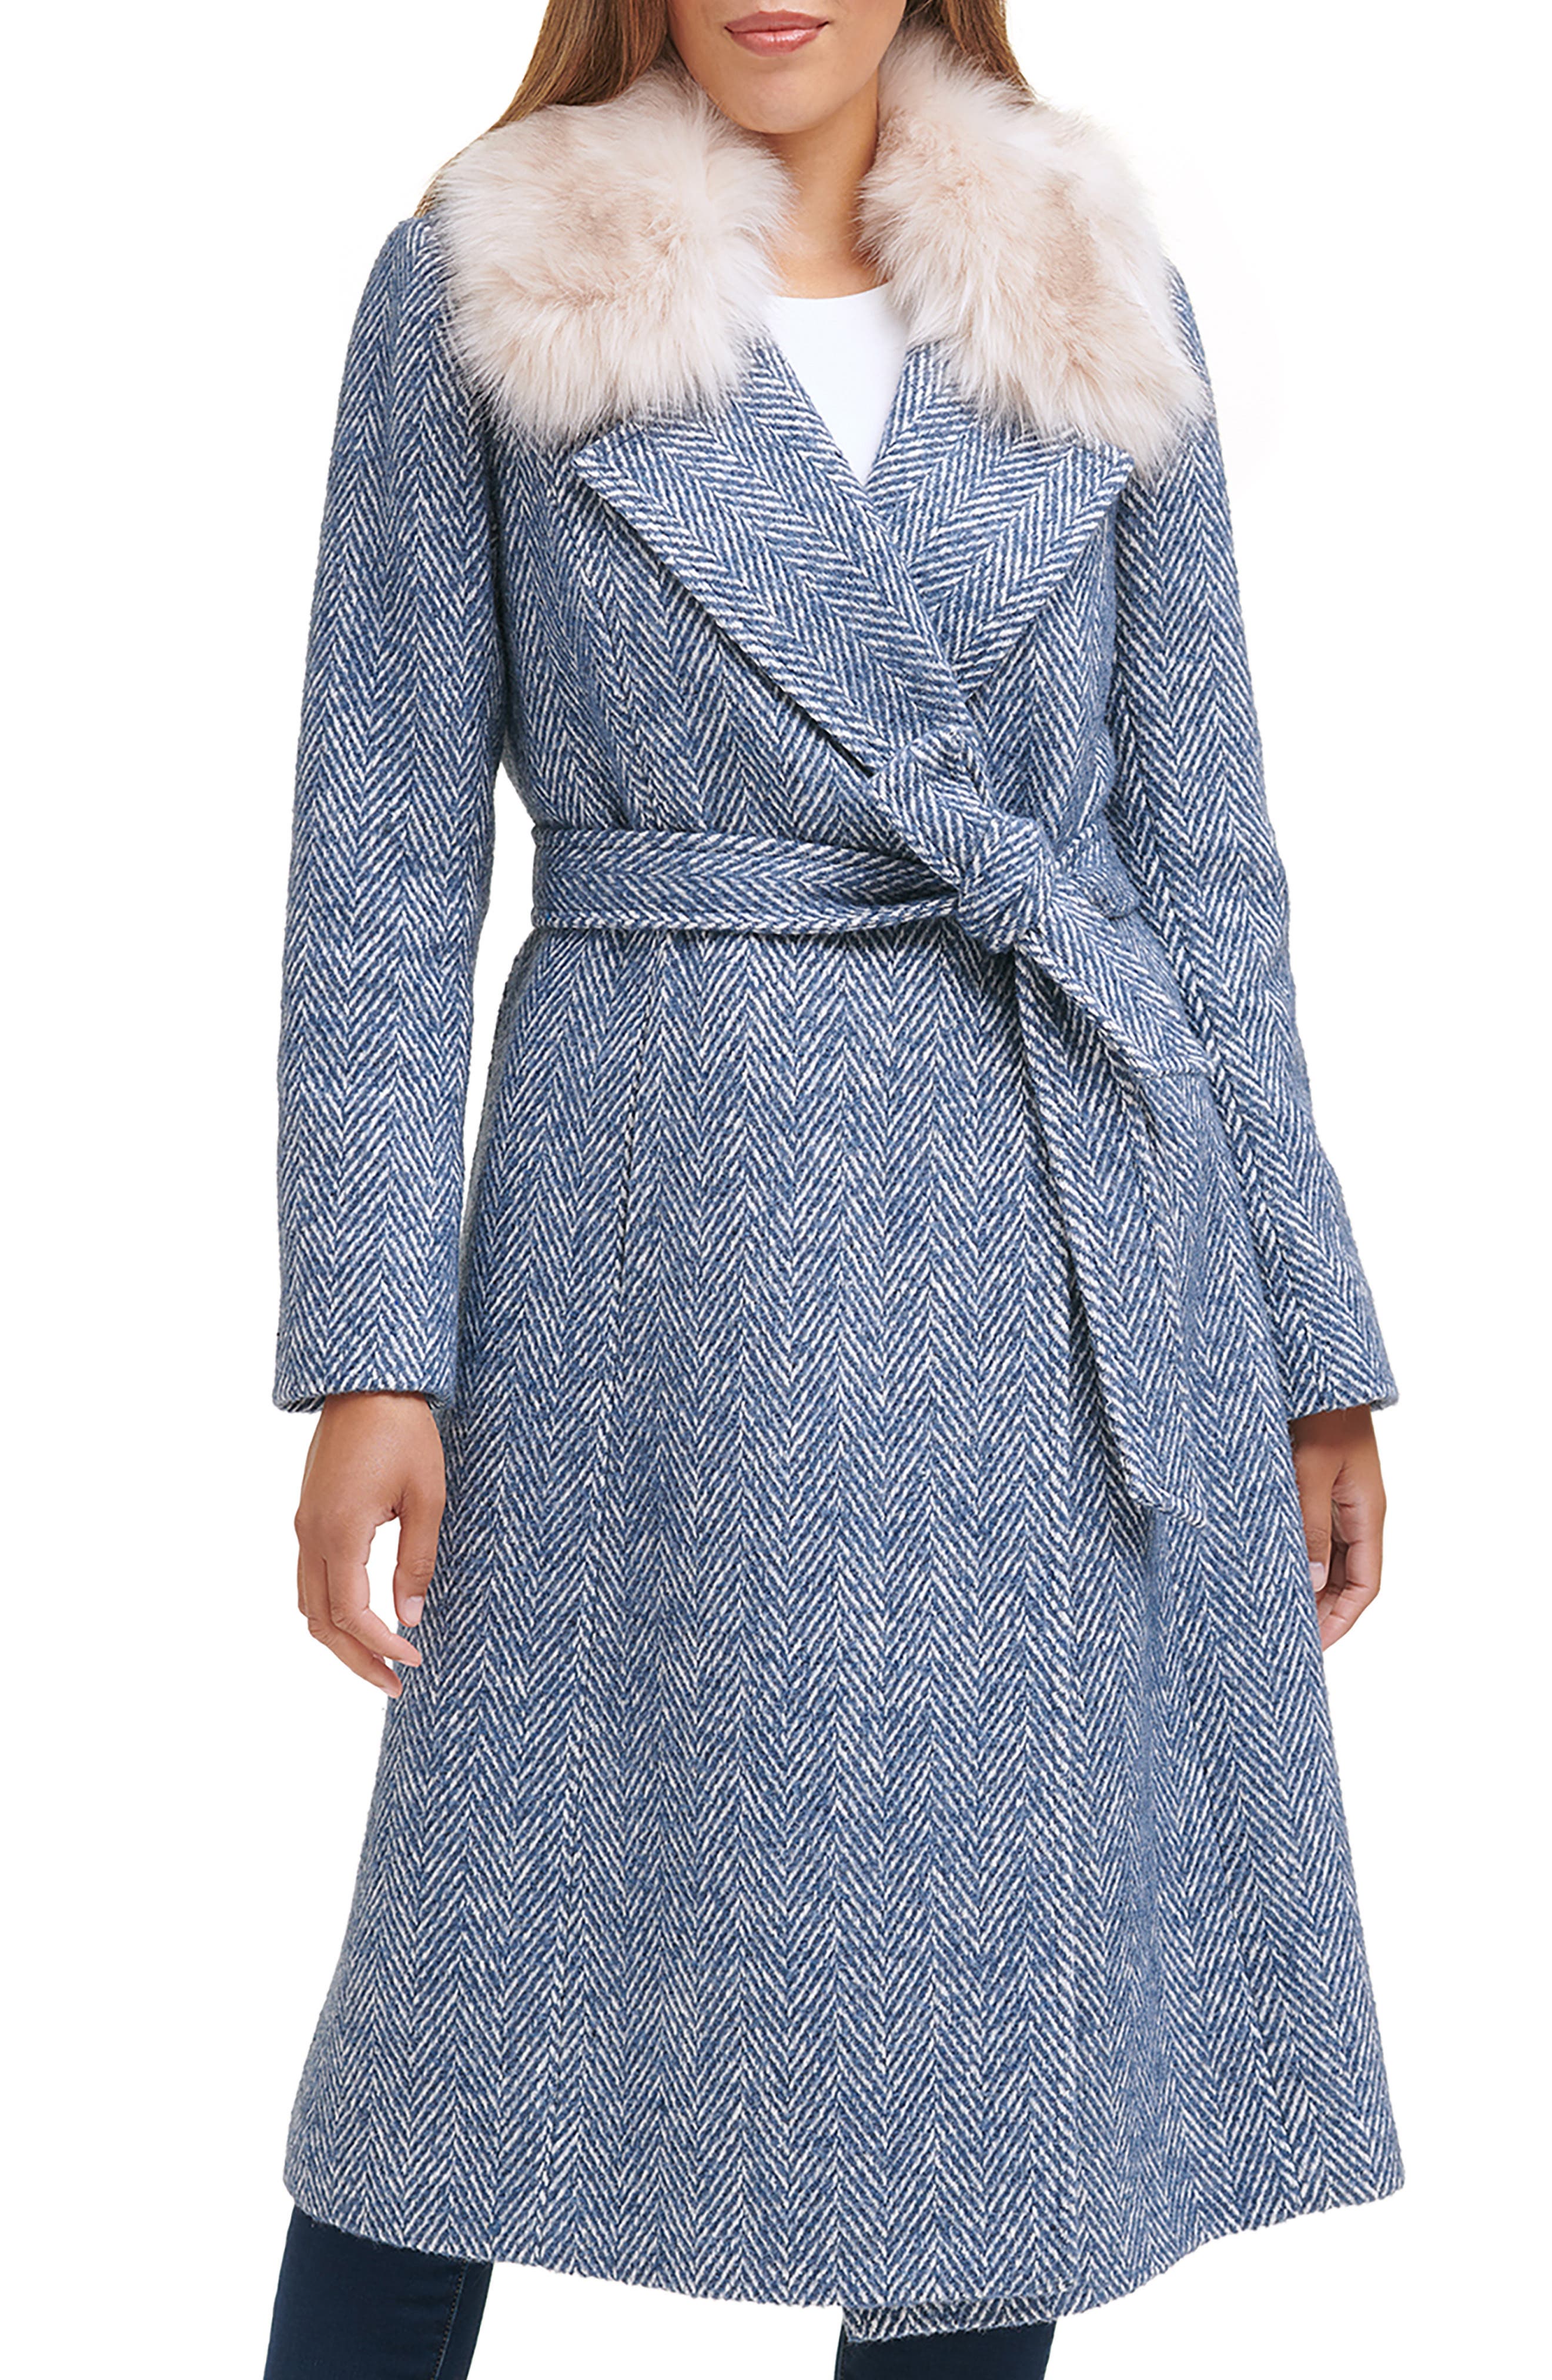 1930s Coats and Jackets History Cole Haan Signature Cole Haan Faux Fur Collar Wrap Coat in Denim at Nordstrom Rack Size 14 $149.97 AT vintagedancer.com